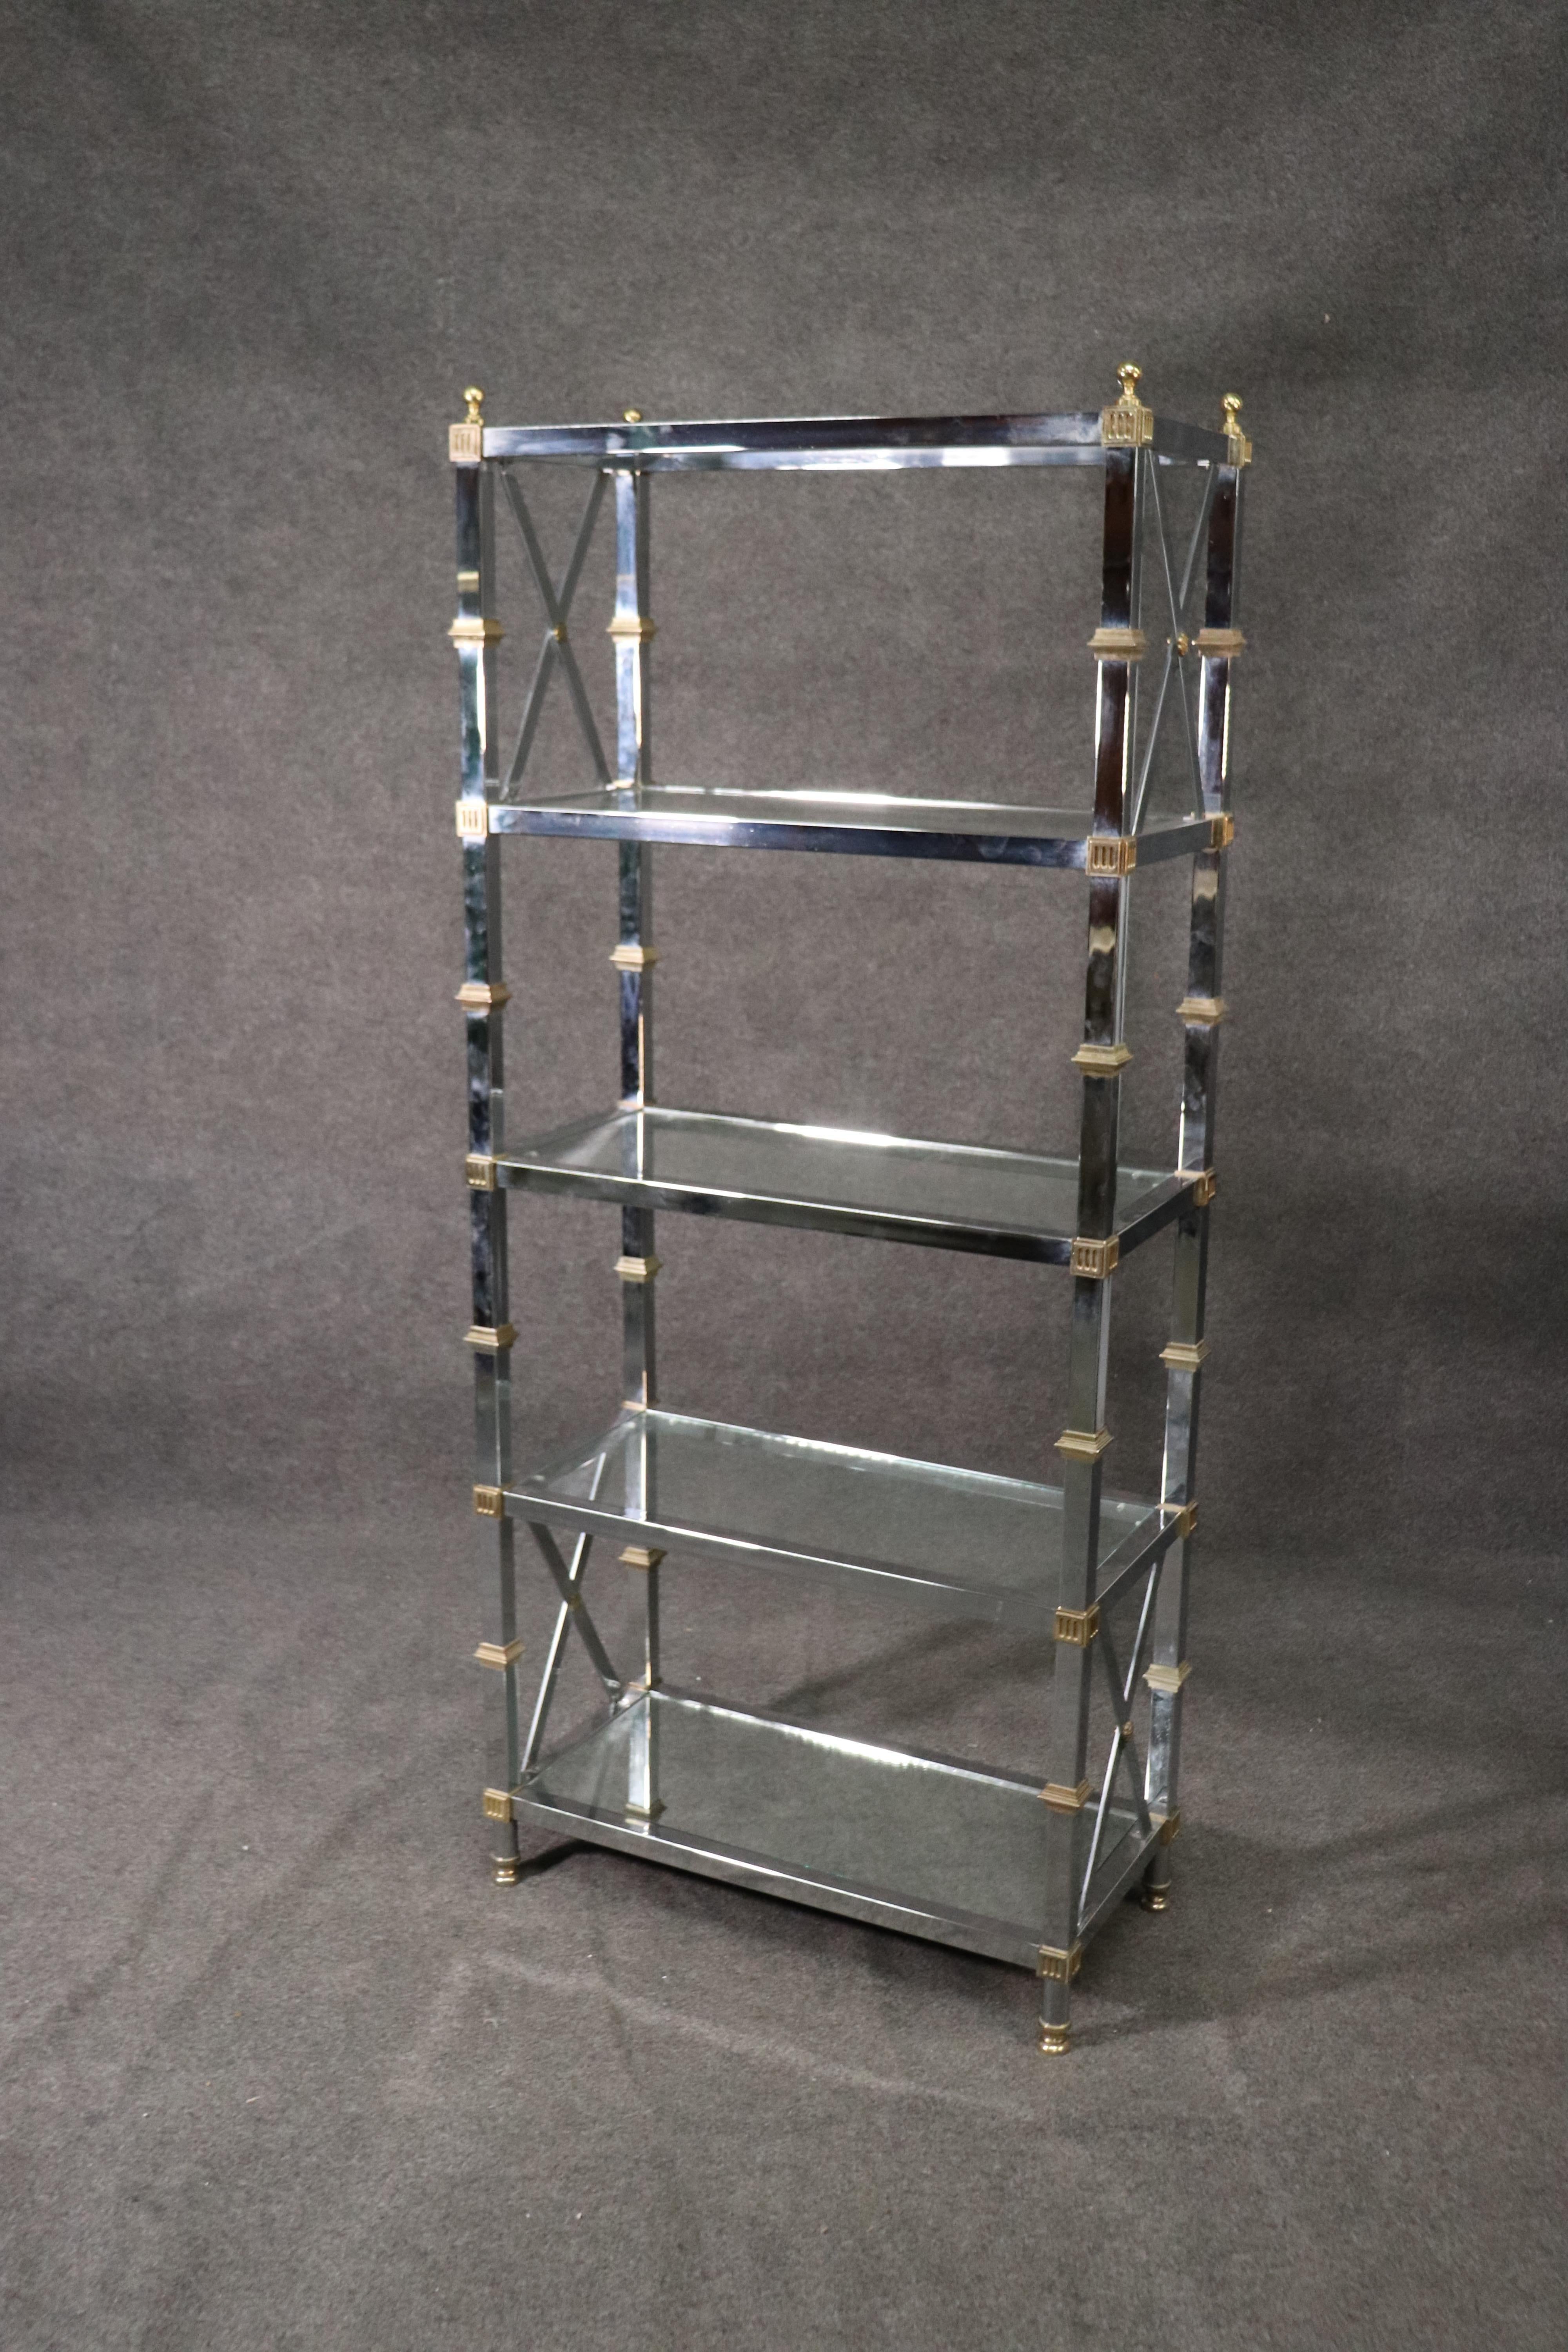 This is a beautiful chrome and brass étagère in the Directoire style. The étagère is in good condition with minor signs of age and wear. The étagère measures: 72 tall x 31 wide x 16 deep. Dates to the late 1960s or early 1970s era.